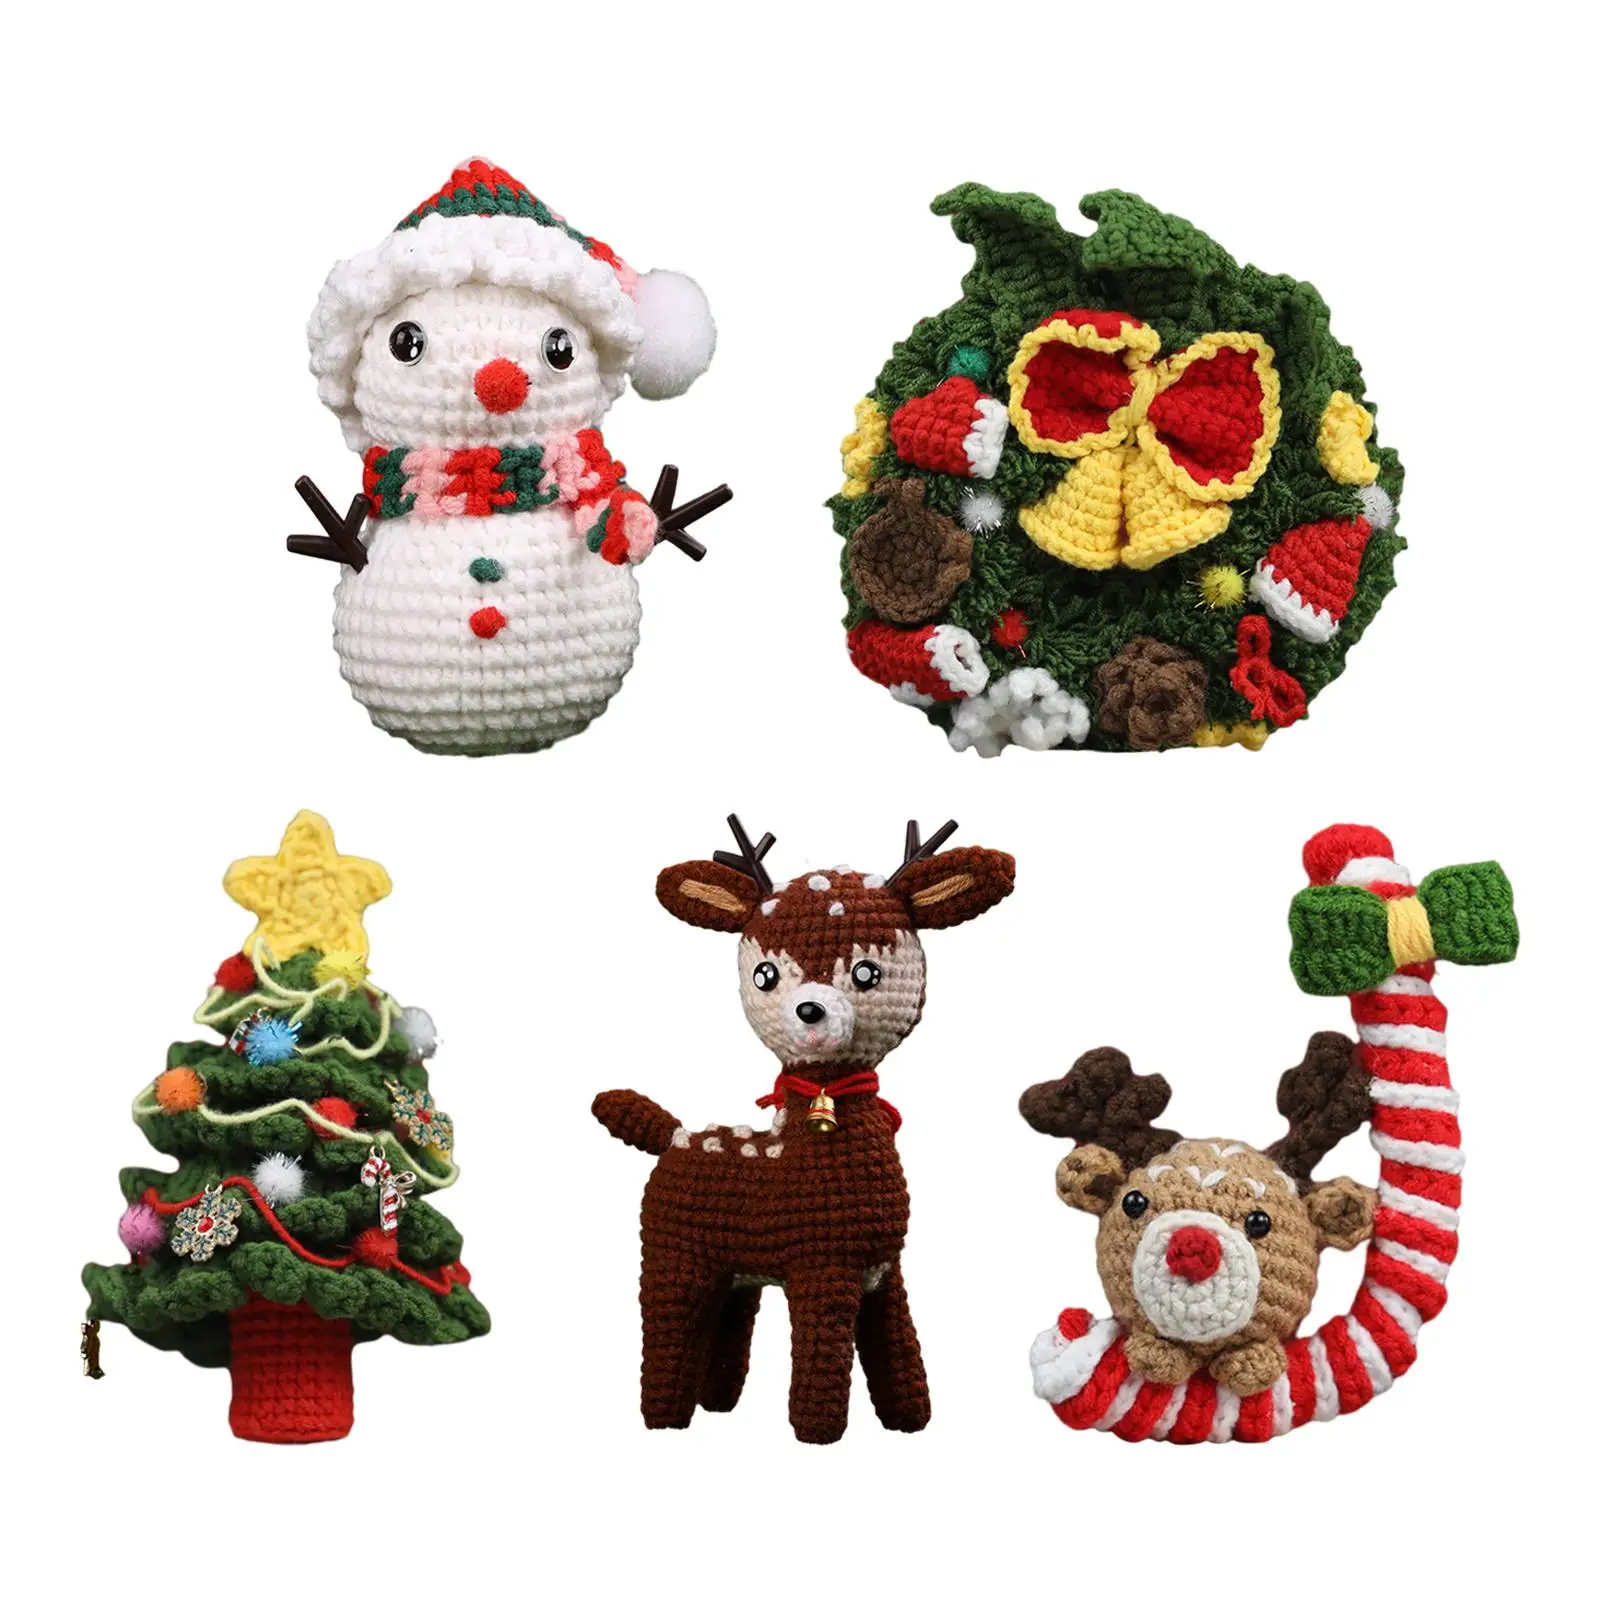 DIY Crochet Doll Kits Holiday Decoration Make Your Own Doll Crocheting Craft Set for Door Gift Porch Christmas Gift